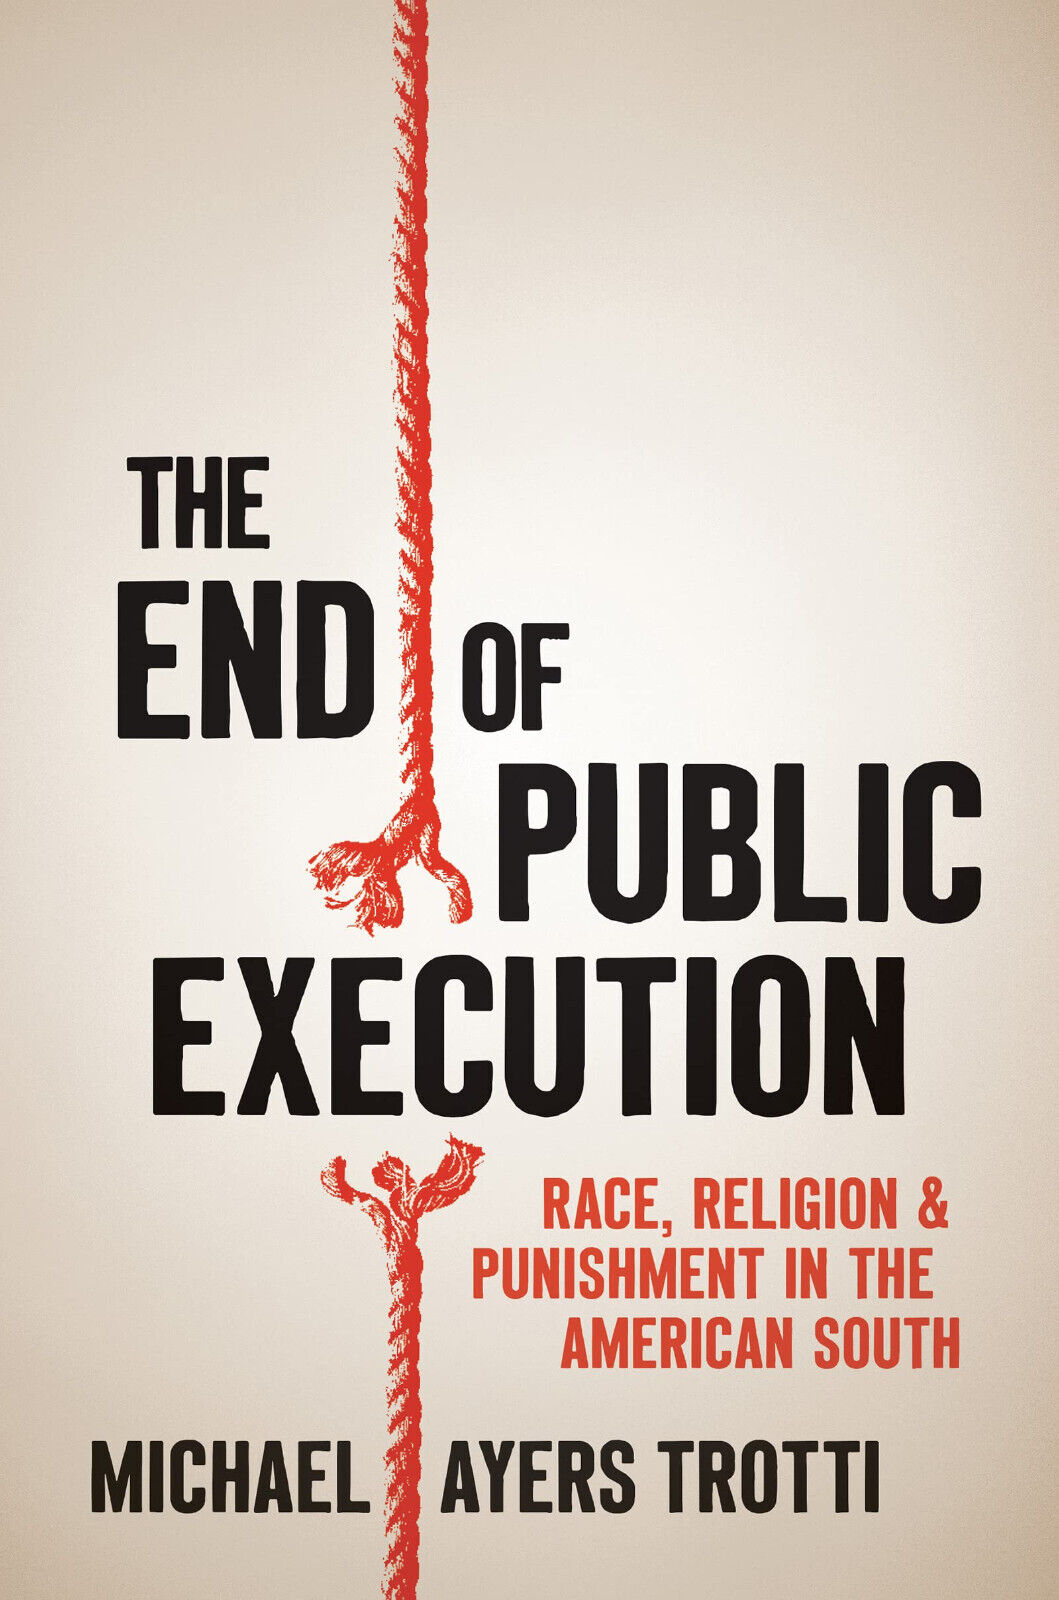 The End of Public Execution: Race, Religion, and Punishment in the American Sout